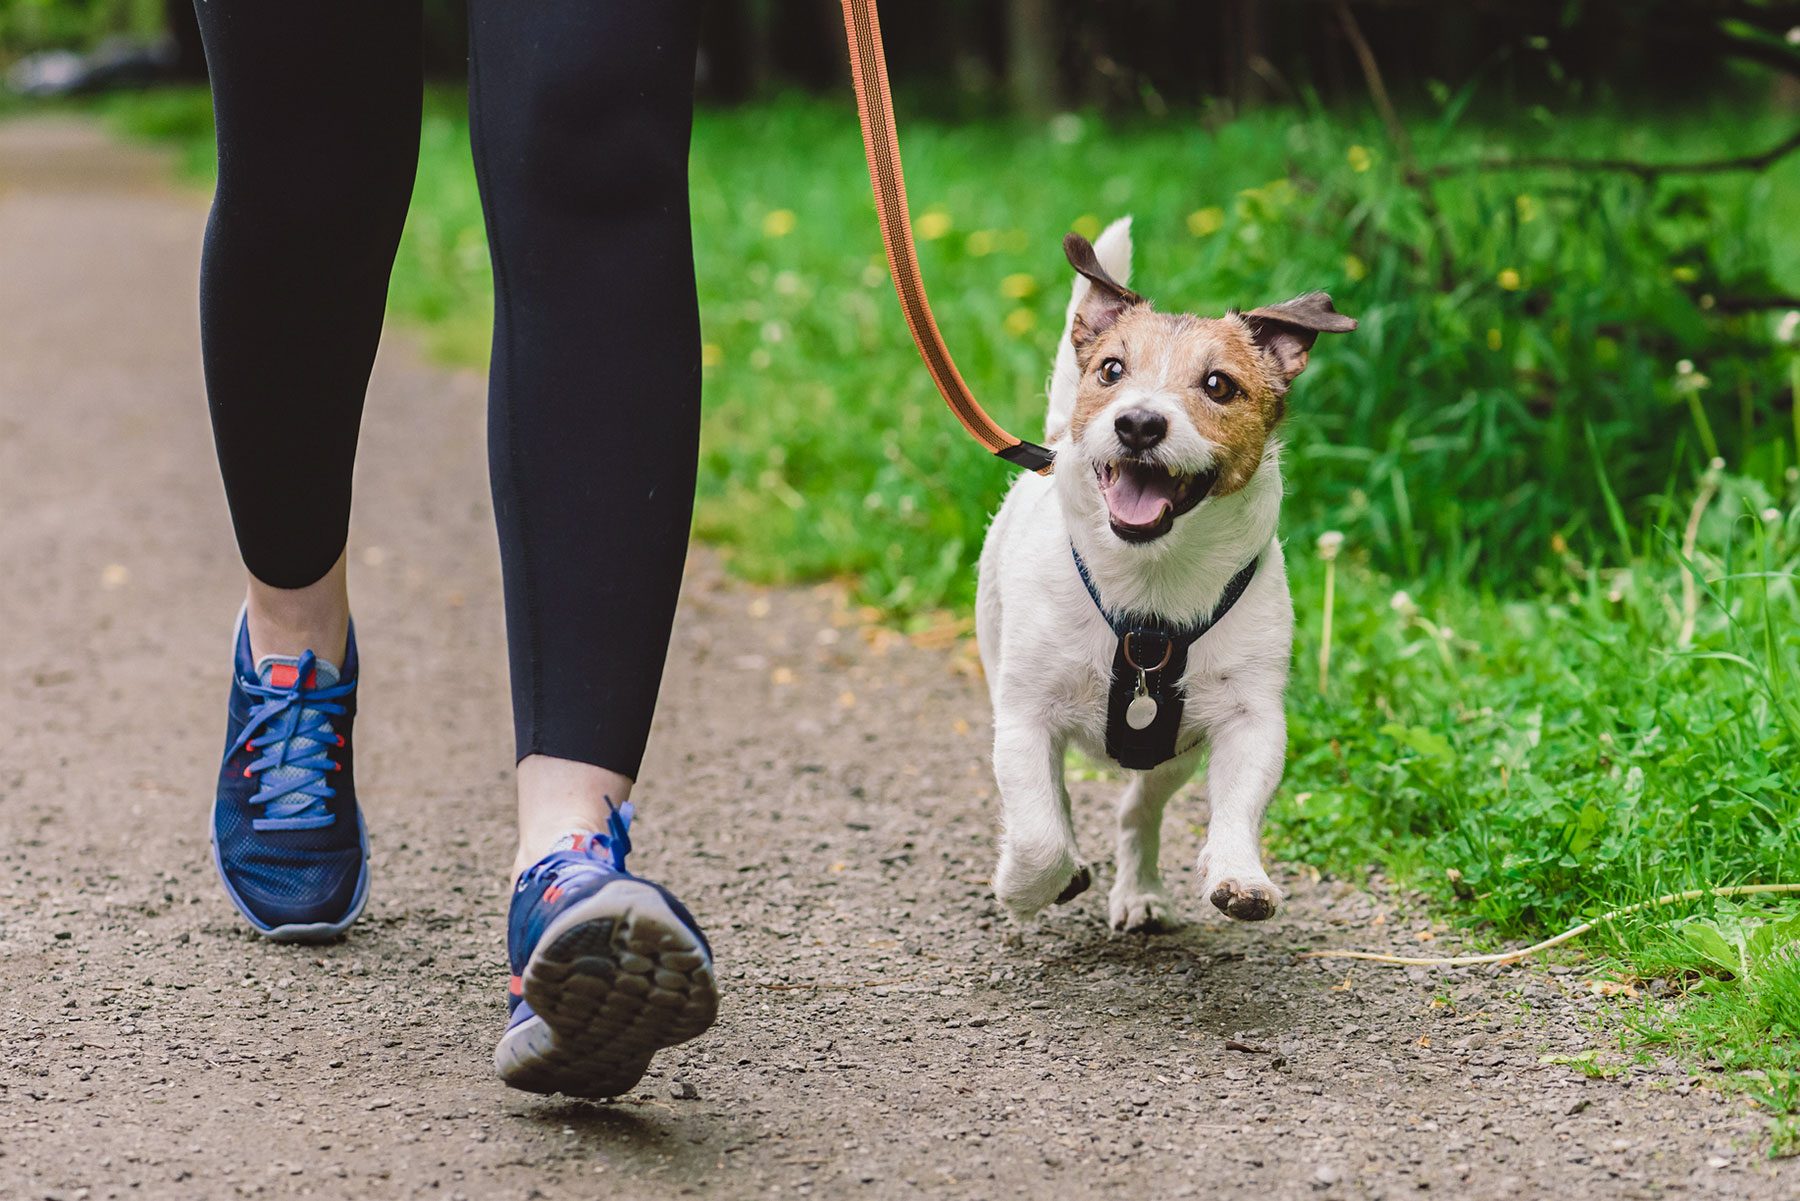 <p>When out for a stroll, a happy dog is at complete ease with fully relaxed muscles. <a href="https://www.rd.com/list/how-much-exercise-dog/" rel="noopener noreferrer">During a walk</a>, a dog that's feeling happy will have a loose, bouncy and smooth gait, says Bekoff. It will also display normal dog behavior, such as sniffing at plants and flowers and engaging with other friendly dogs and passersby.</p> <p>Happy dogs take their time to explore everything around them during their walks, enjoying every moment. Poor leash manners, such as tugging at the leash and walking far ahead of you instead of at your side, shouldn't be an issue if your dog feels happy during a walk.</p>